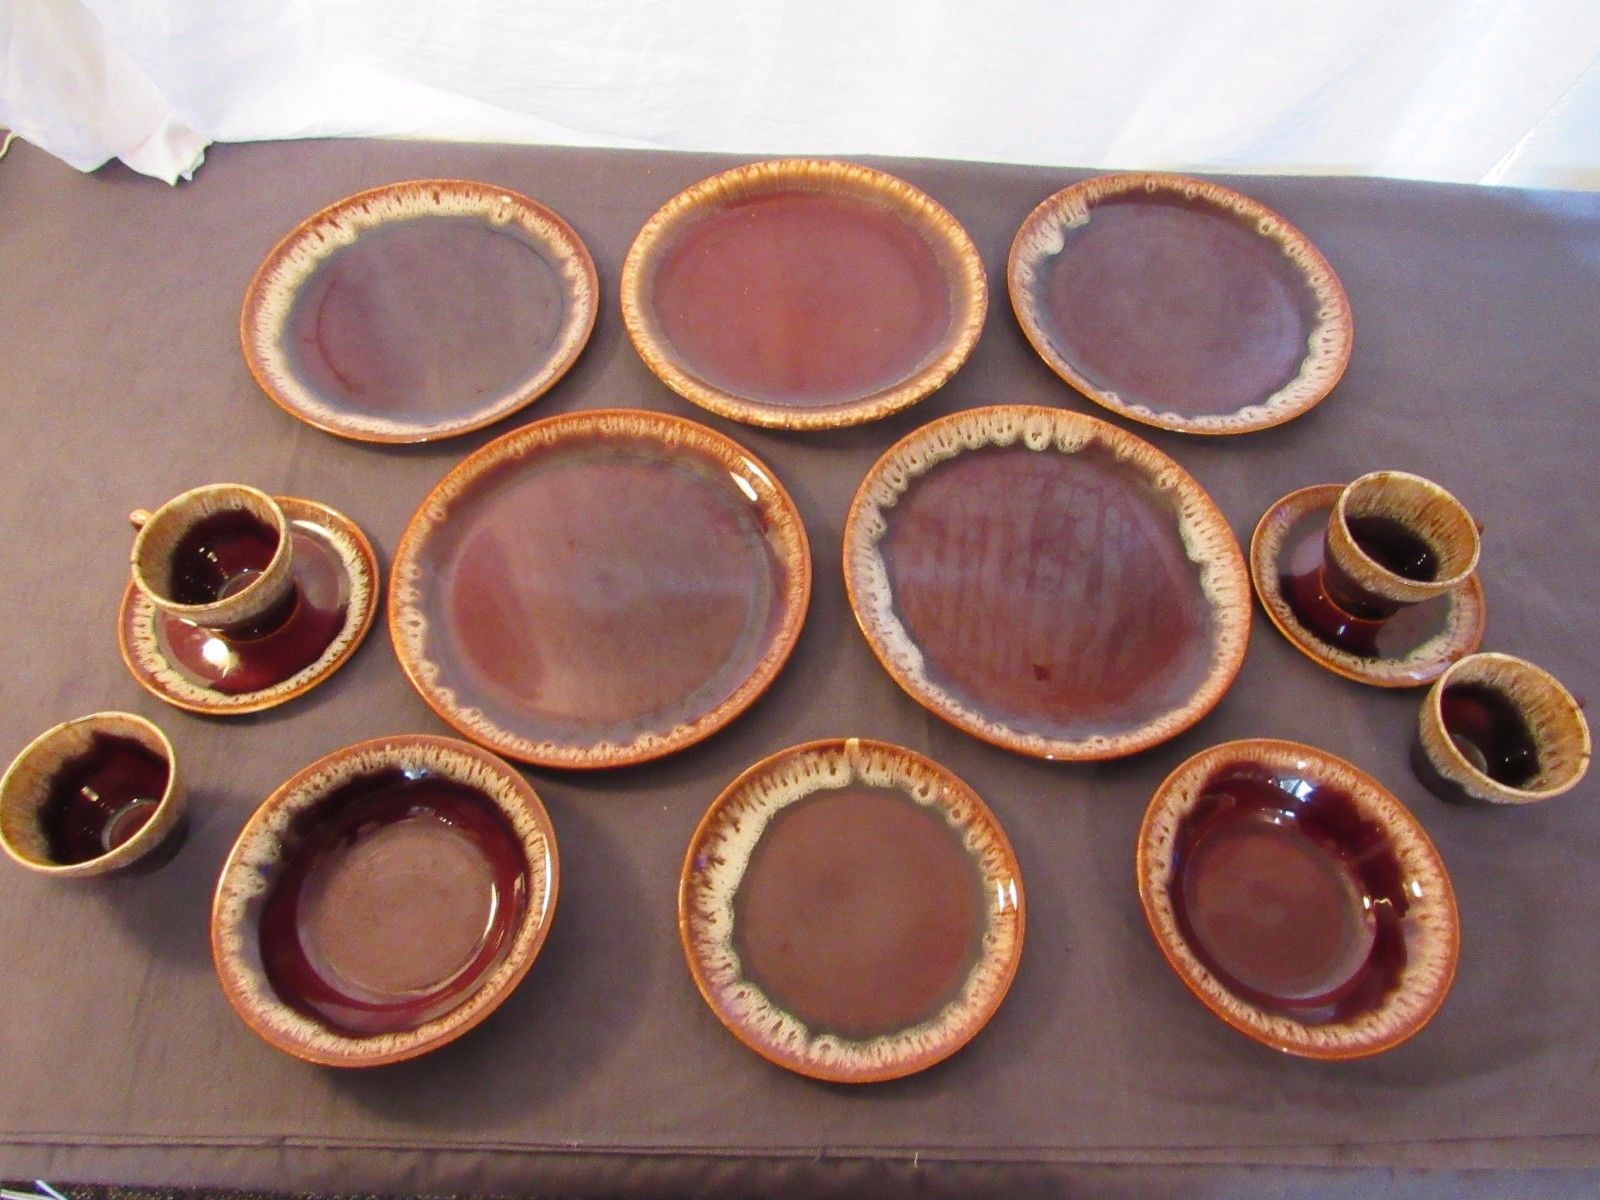 Dinner Plates Saucers Bowls Cups Brown Drip Glaze Hull? Replacement Pieces - $64.45